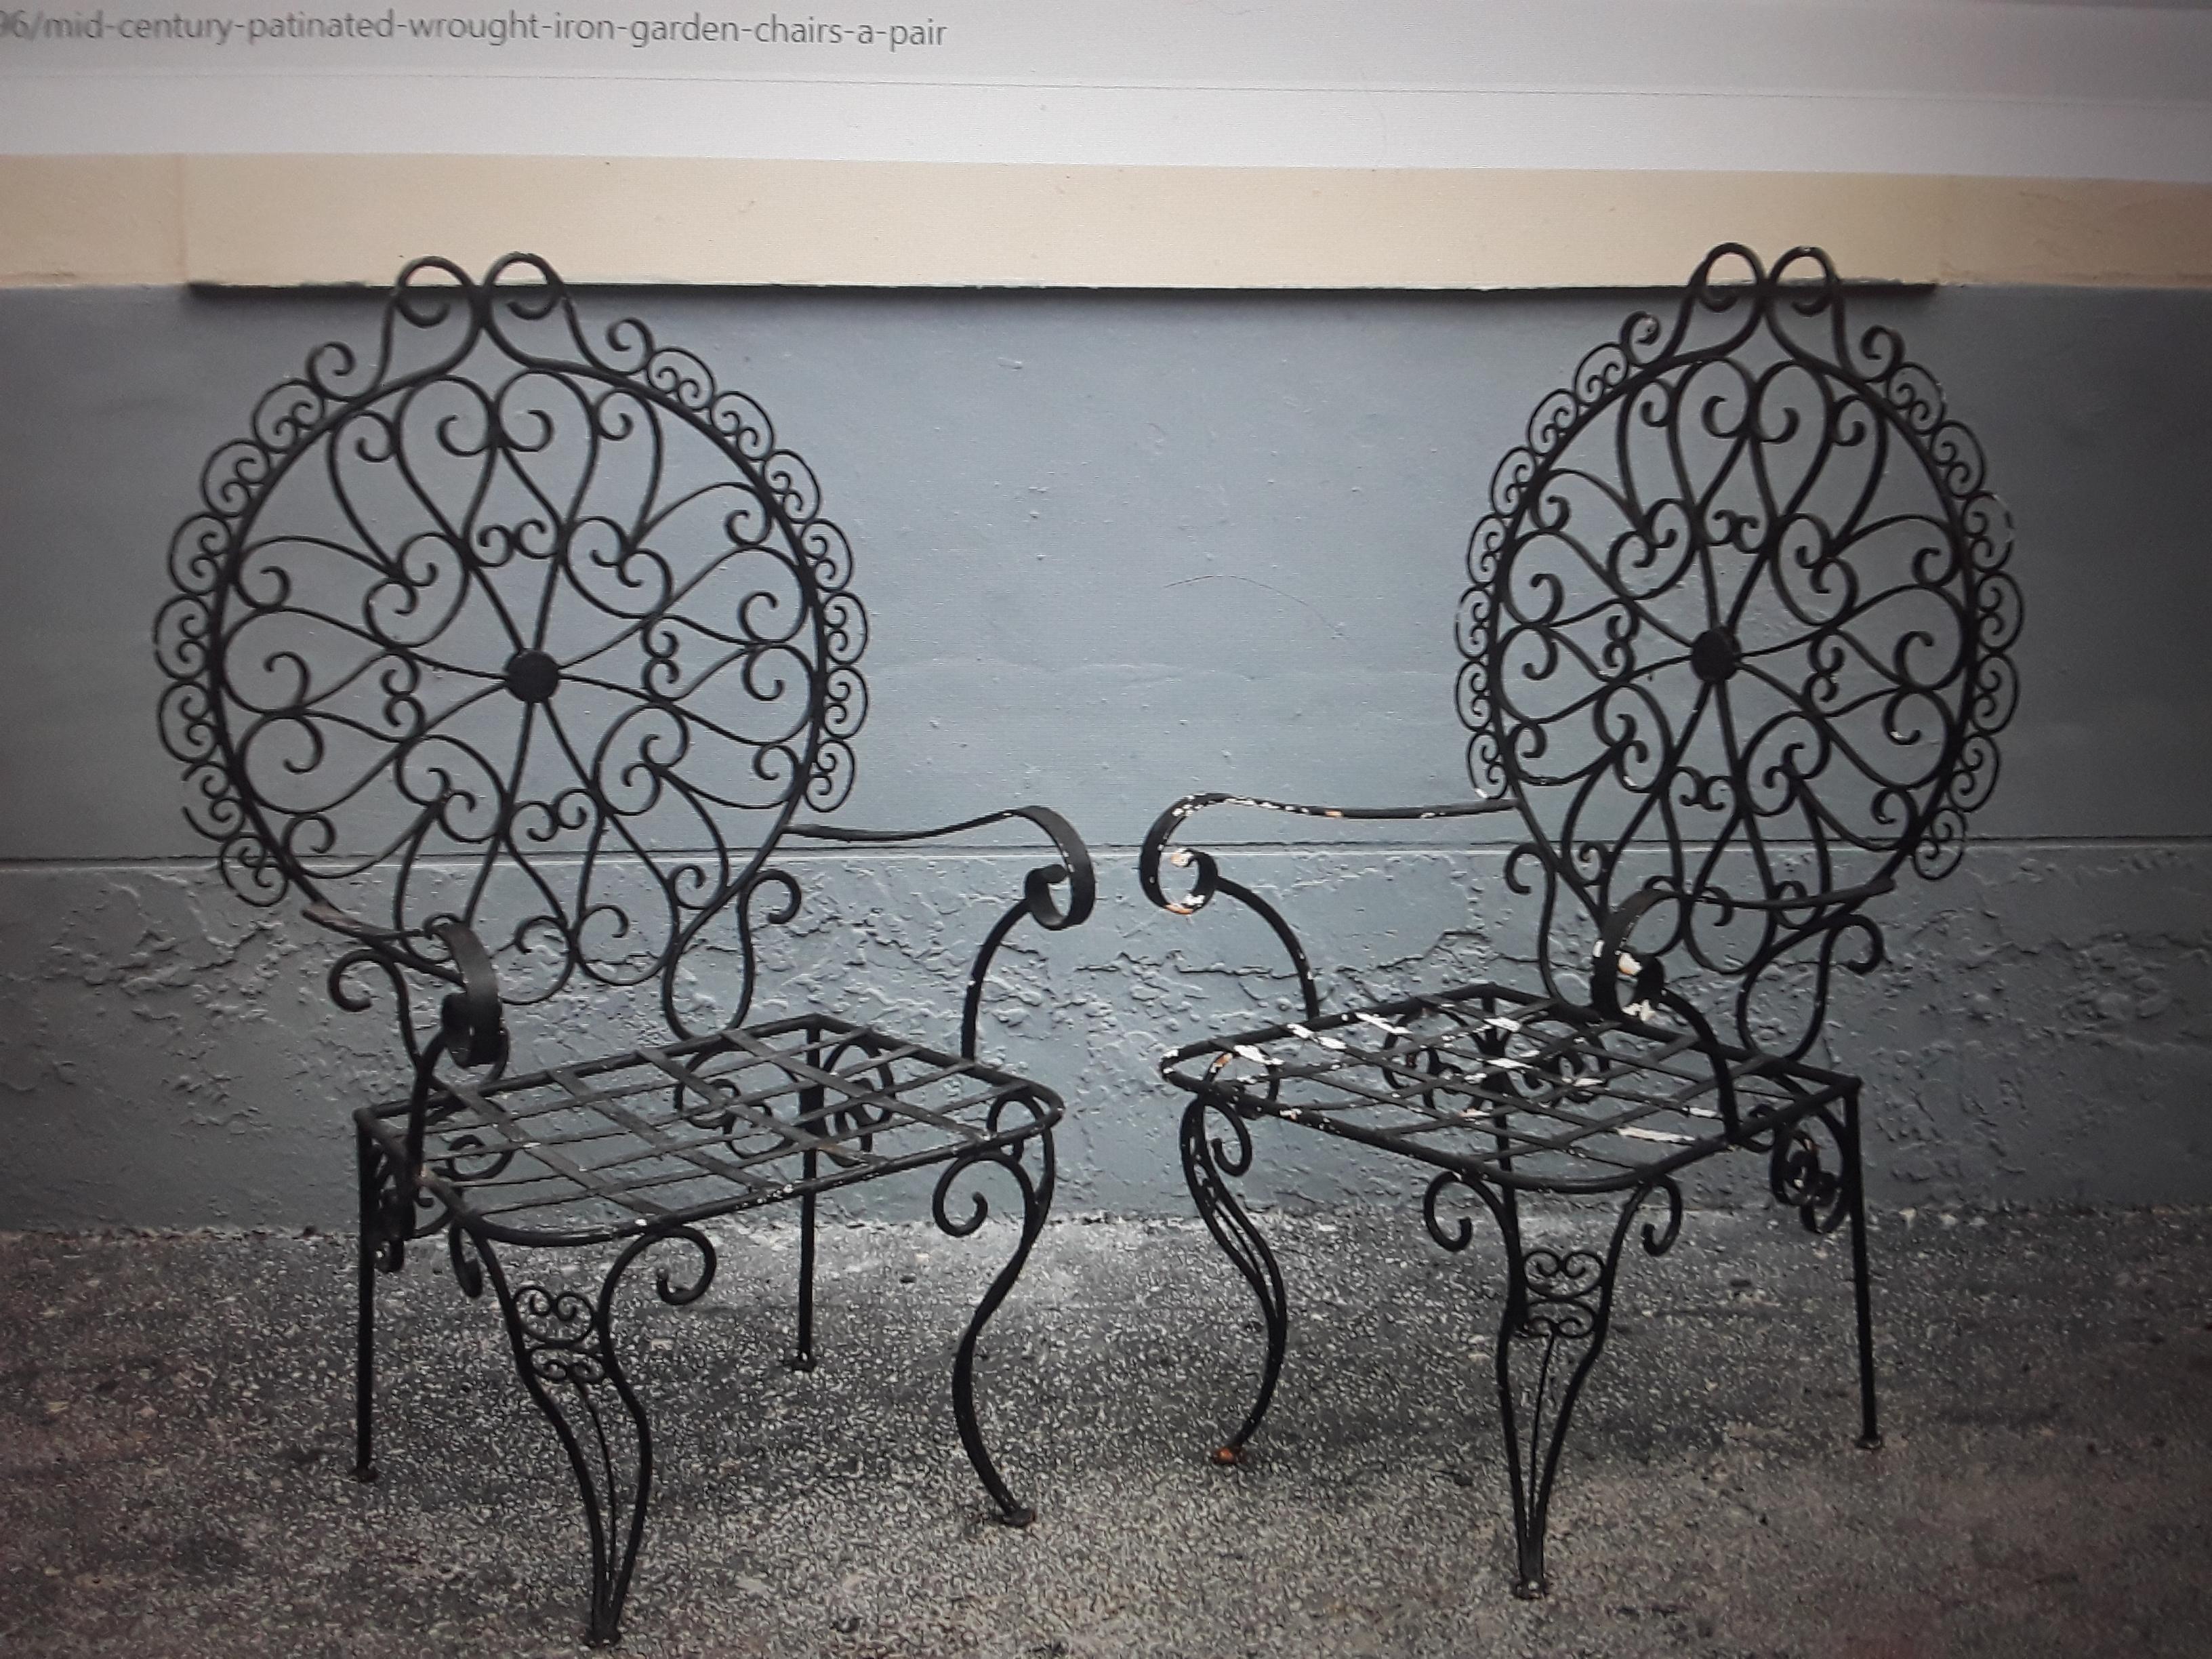 Pair 1950's Mid Century Wrought Iron Garden Chairs. Patinated Black, worn paint mostly on one chair. Lovely set which could be used on the porch, in the garden, many places.